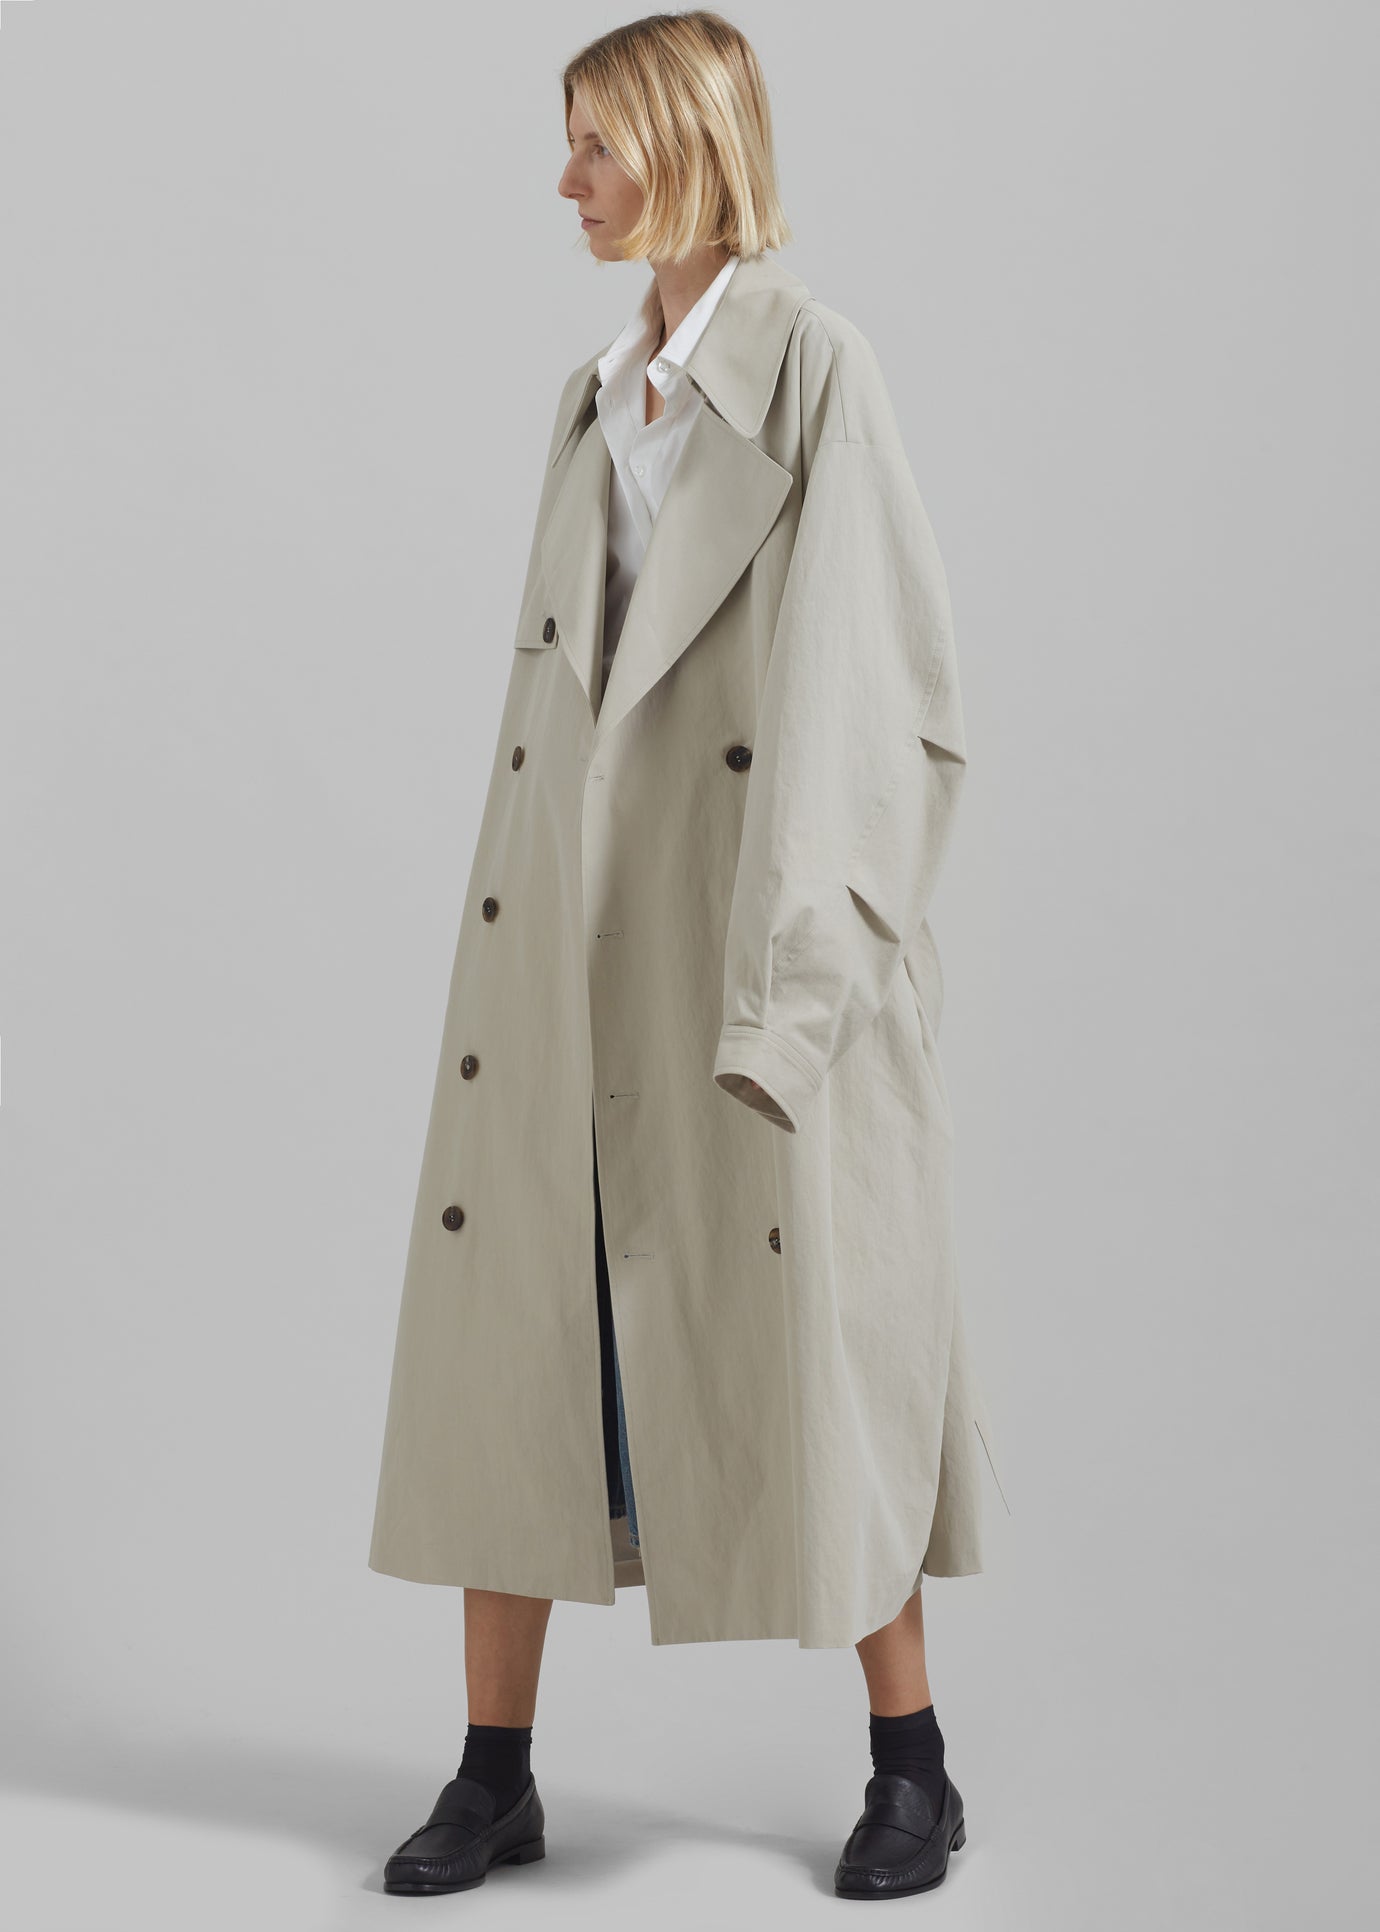 Anika Double Breasted Trench Coat - Beige - 1